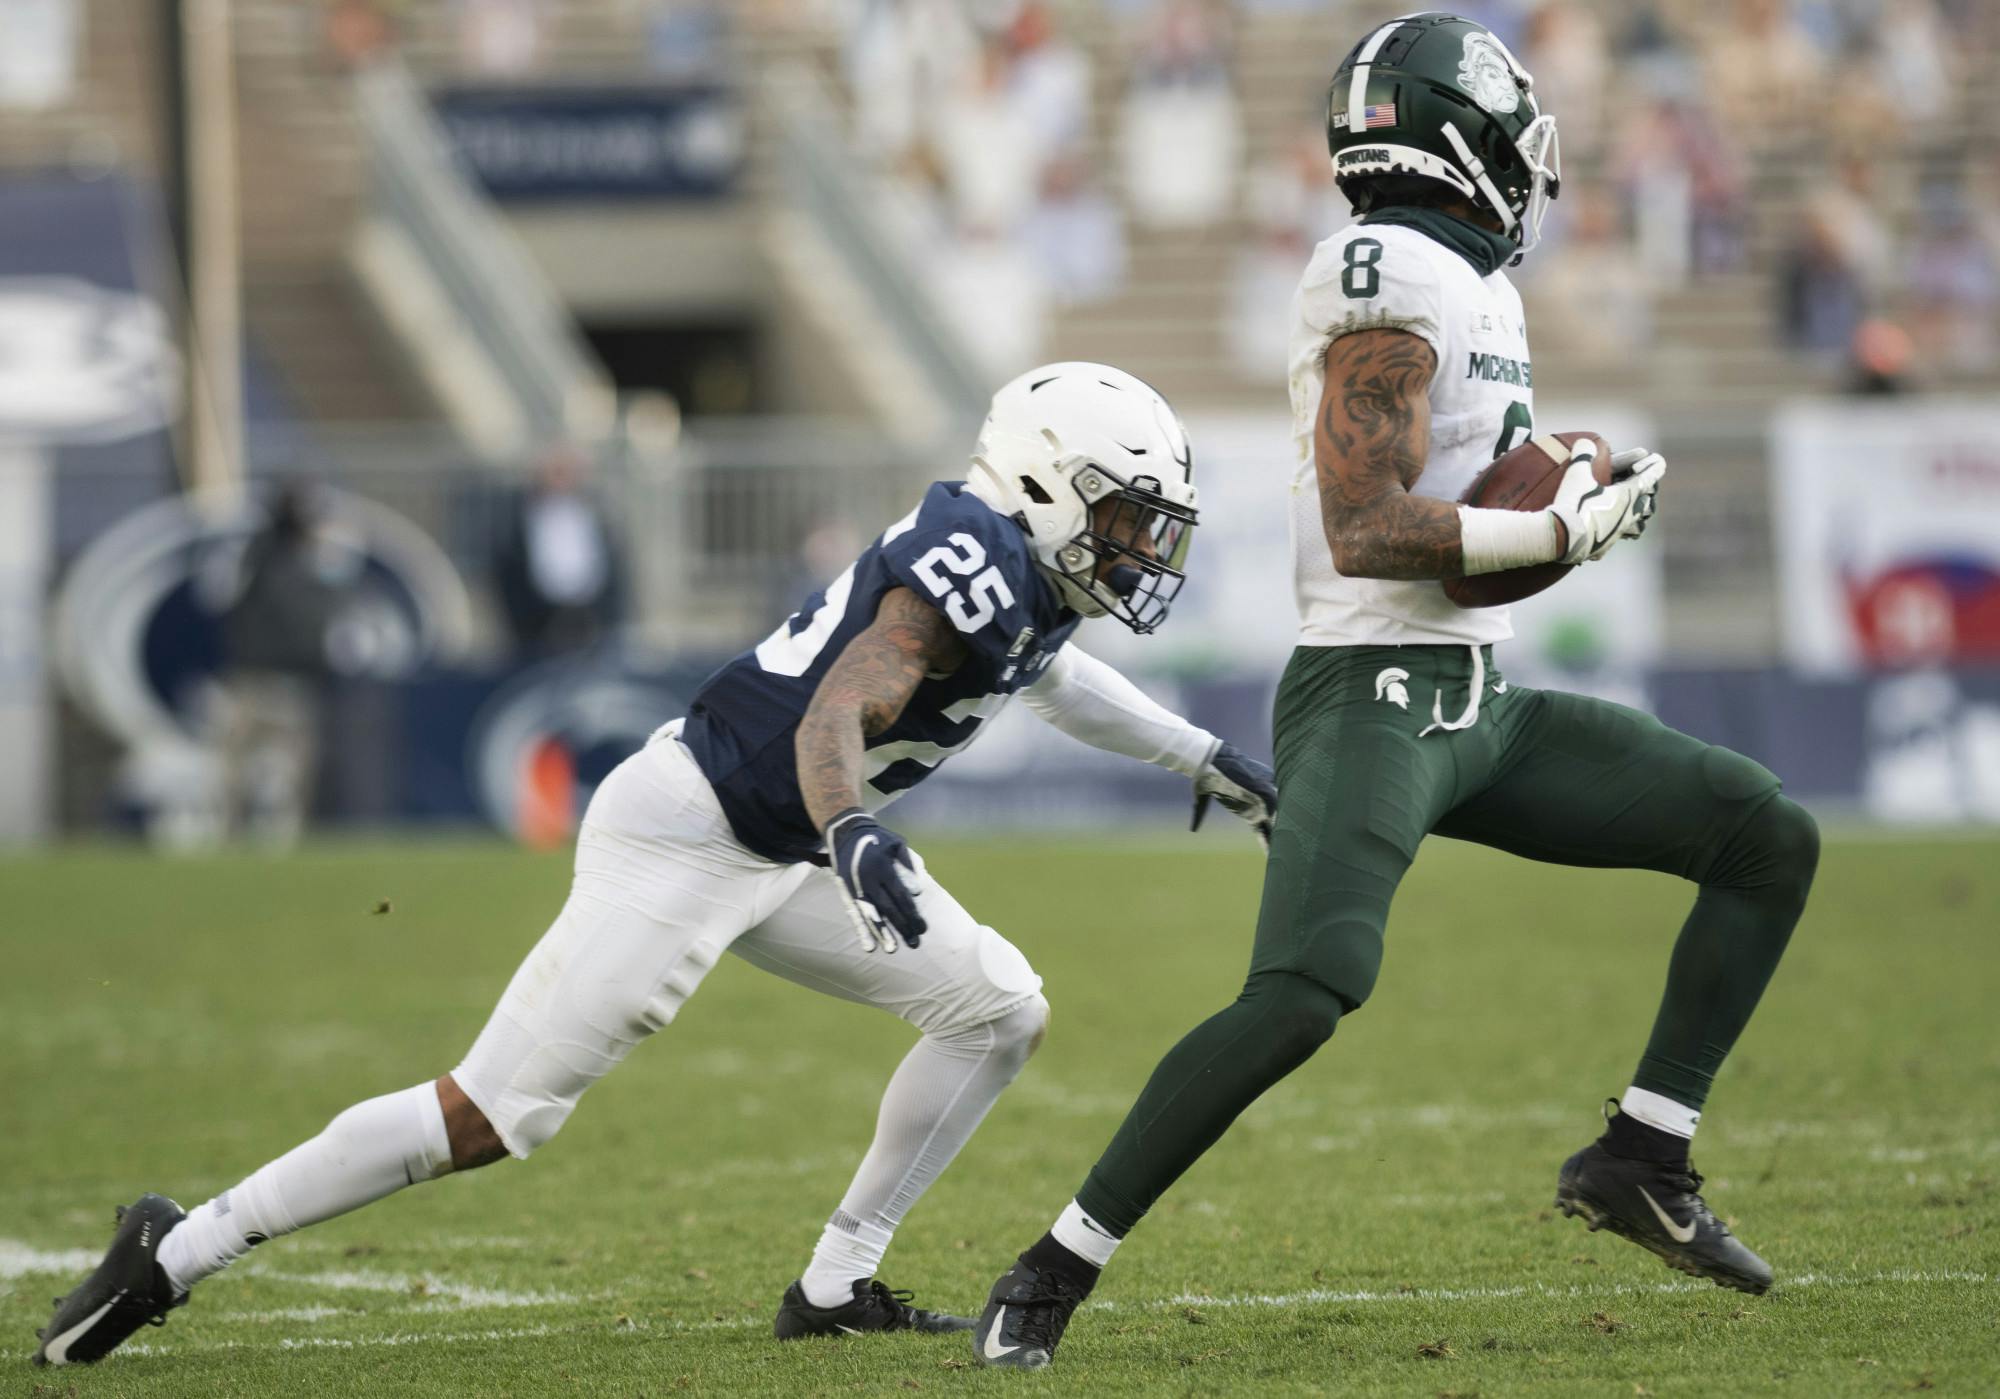 <p>Penn State cornerback Daequan Hardy (25) runs to tackle Michigan State’s Jalen Nailor (8) during the game on Saturday, Dec. 12, 2020, in Beaver Stadium. Penn State won 39-24. Photos courtesy of Lily LaRegina, photographer and photo editor at The Daily Collegian.</p>